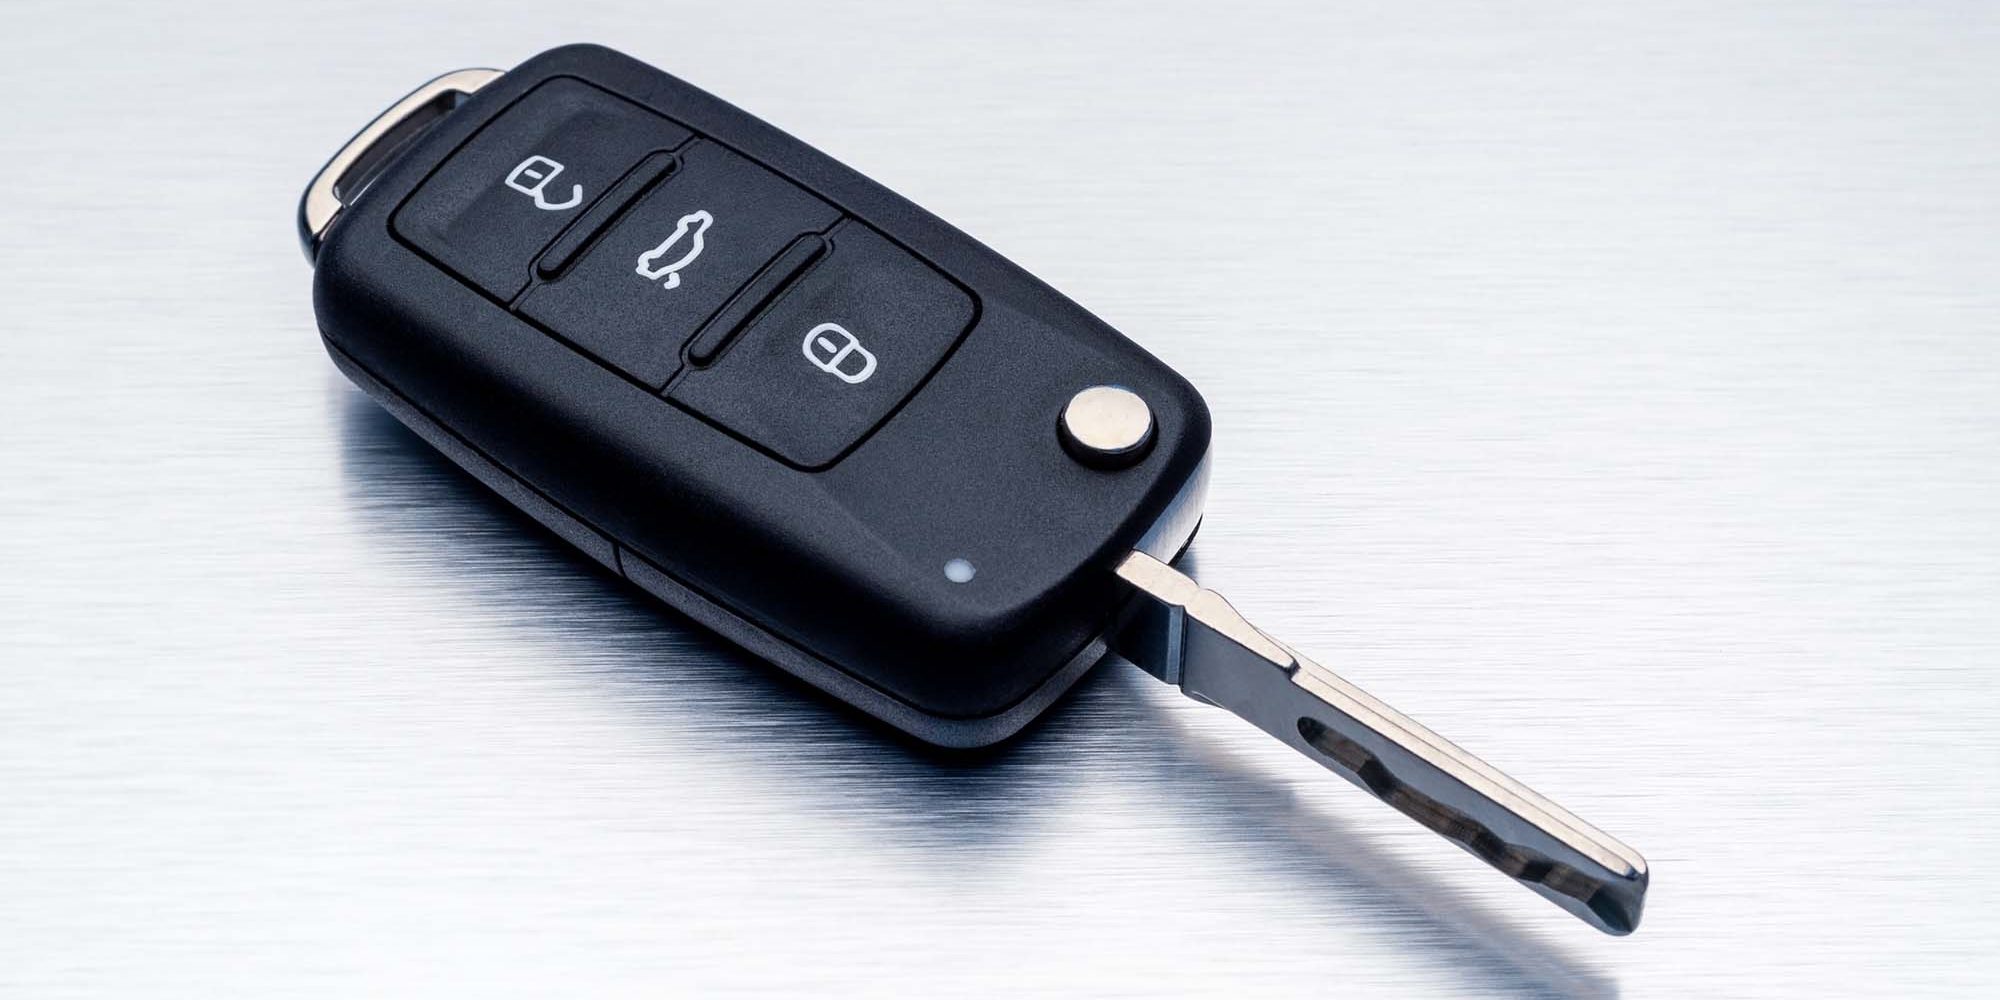 New car key fob on aluminium background. Repair of broken or damaged remote key fob of any vehicle car service concept.- Image